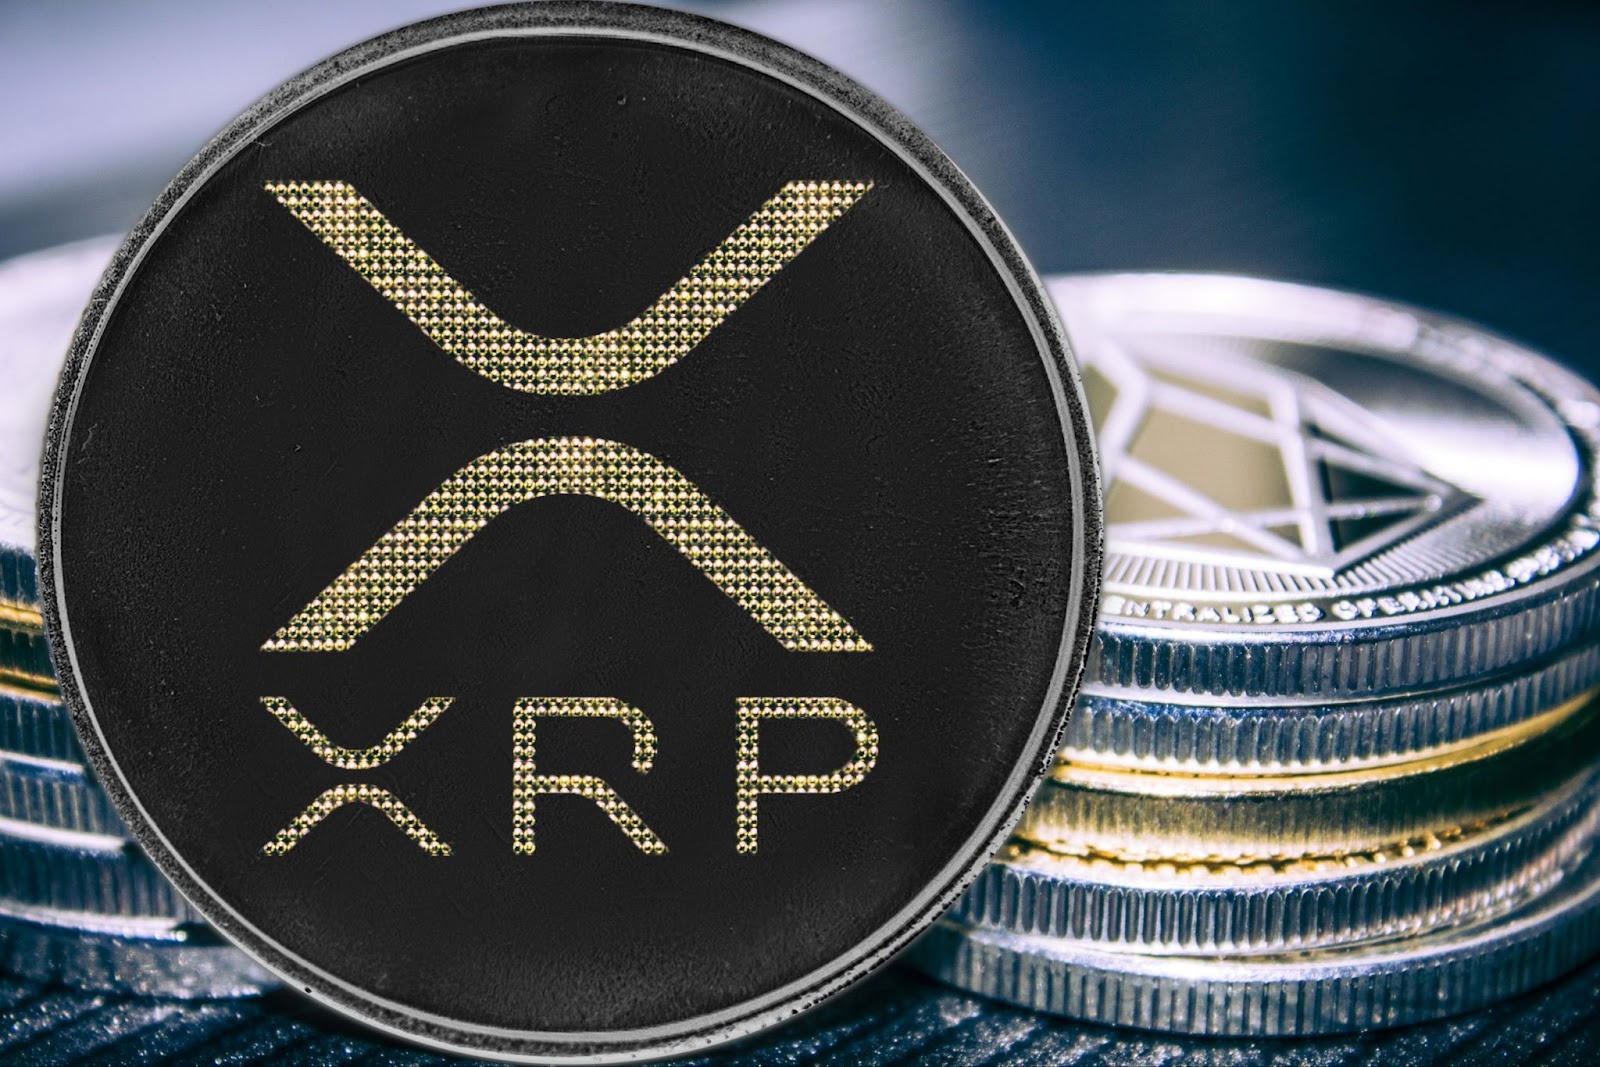 XRP, as one of the top 10 cryptos